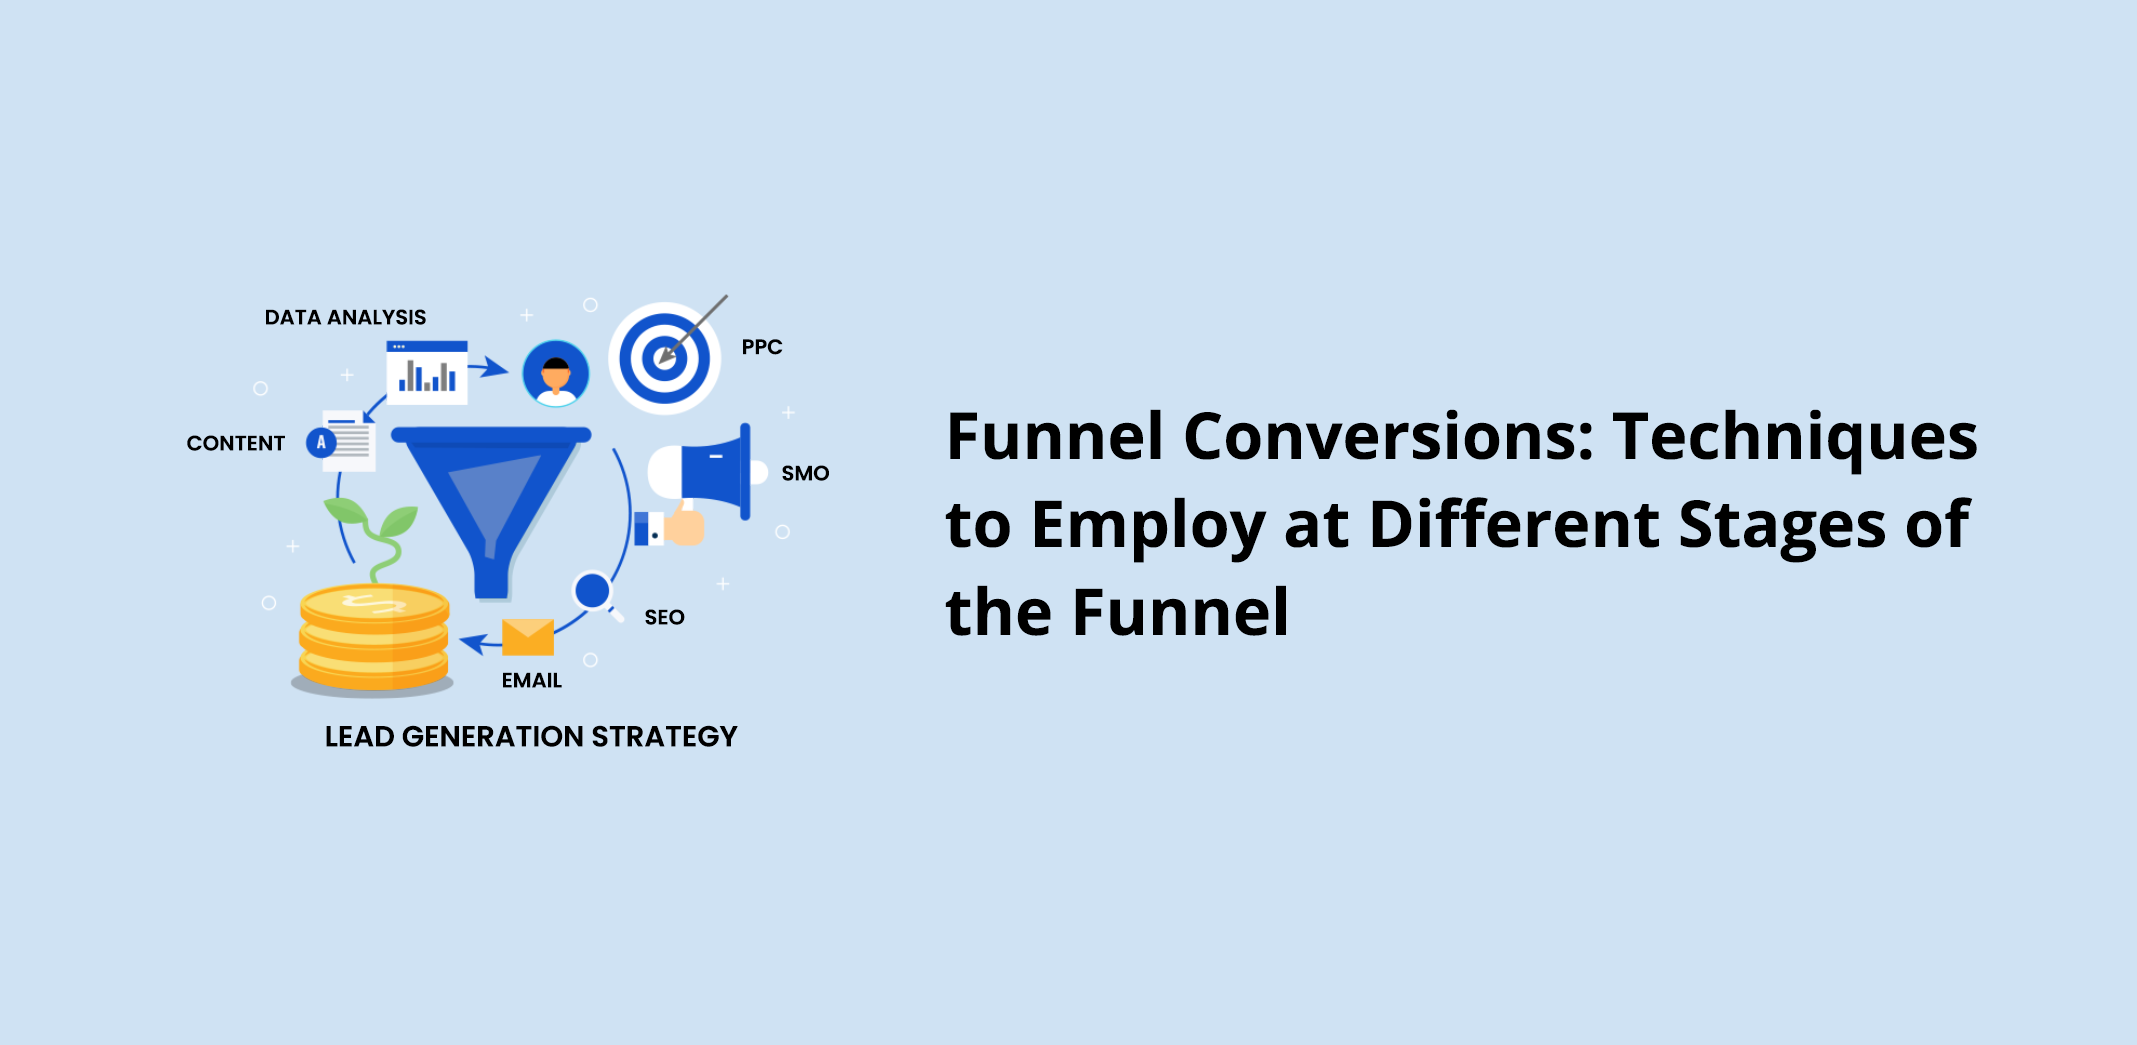 Funnel Conversions: Techniques to Employ at Different Stages of the Funnel